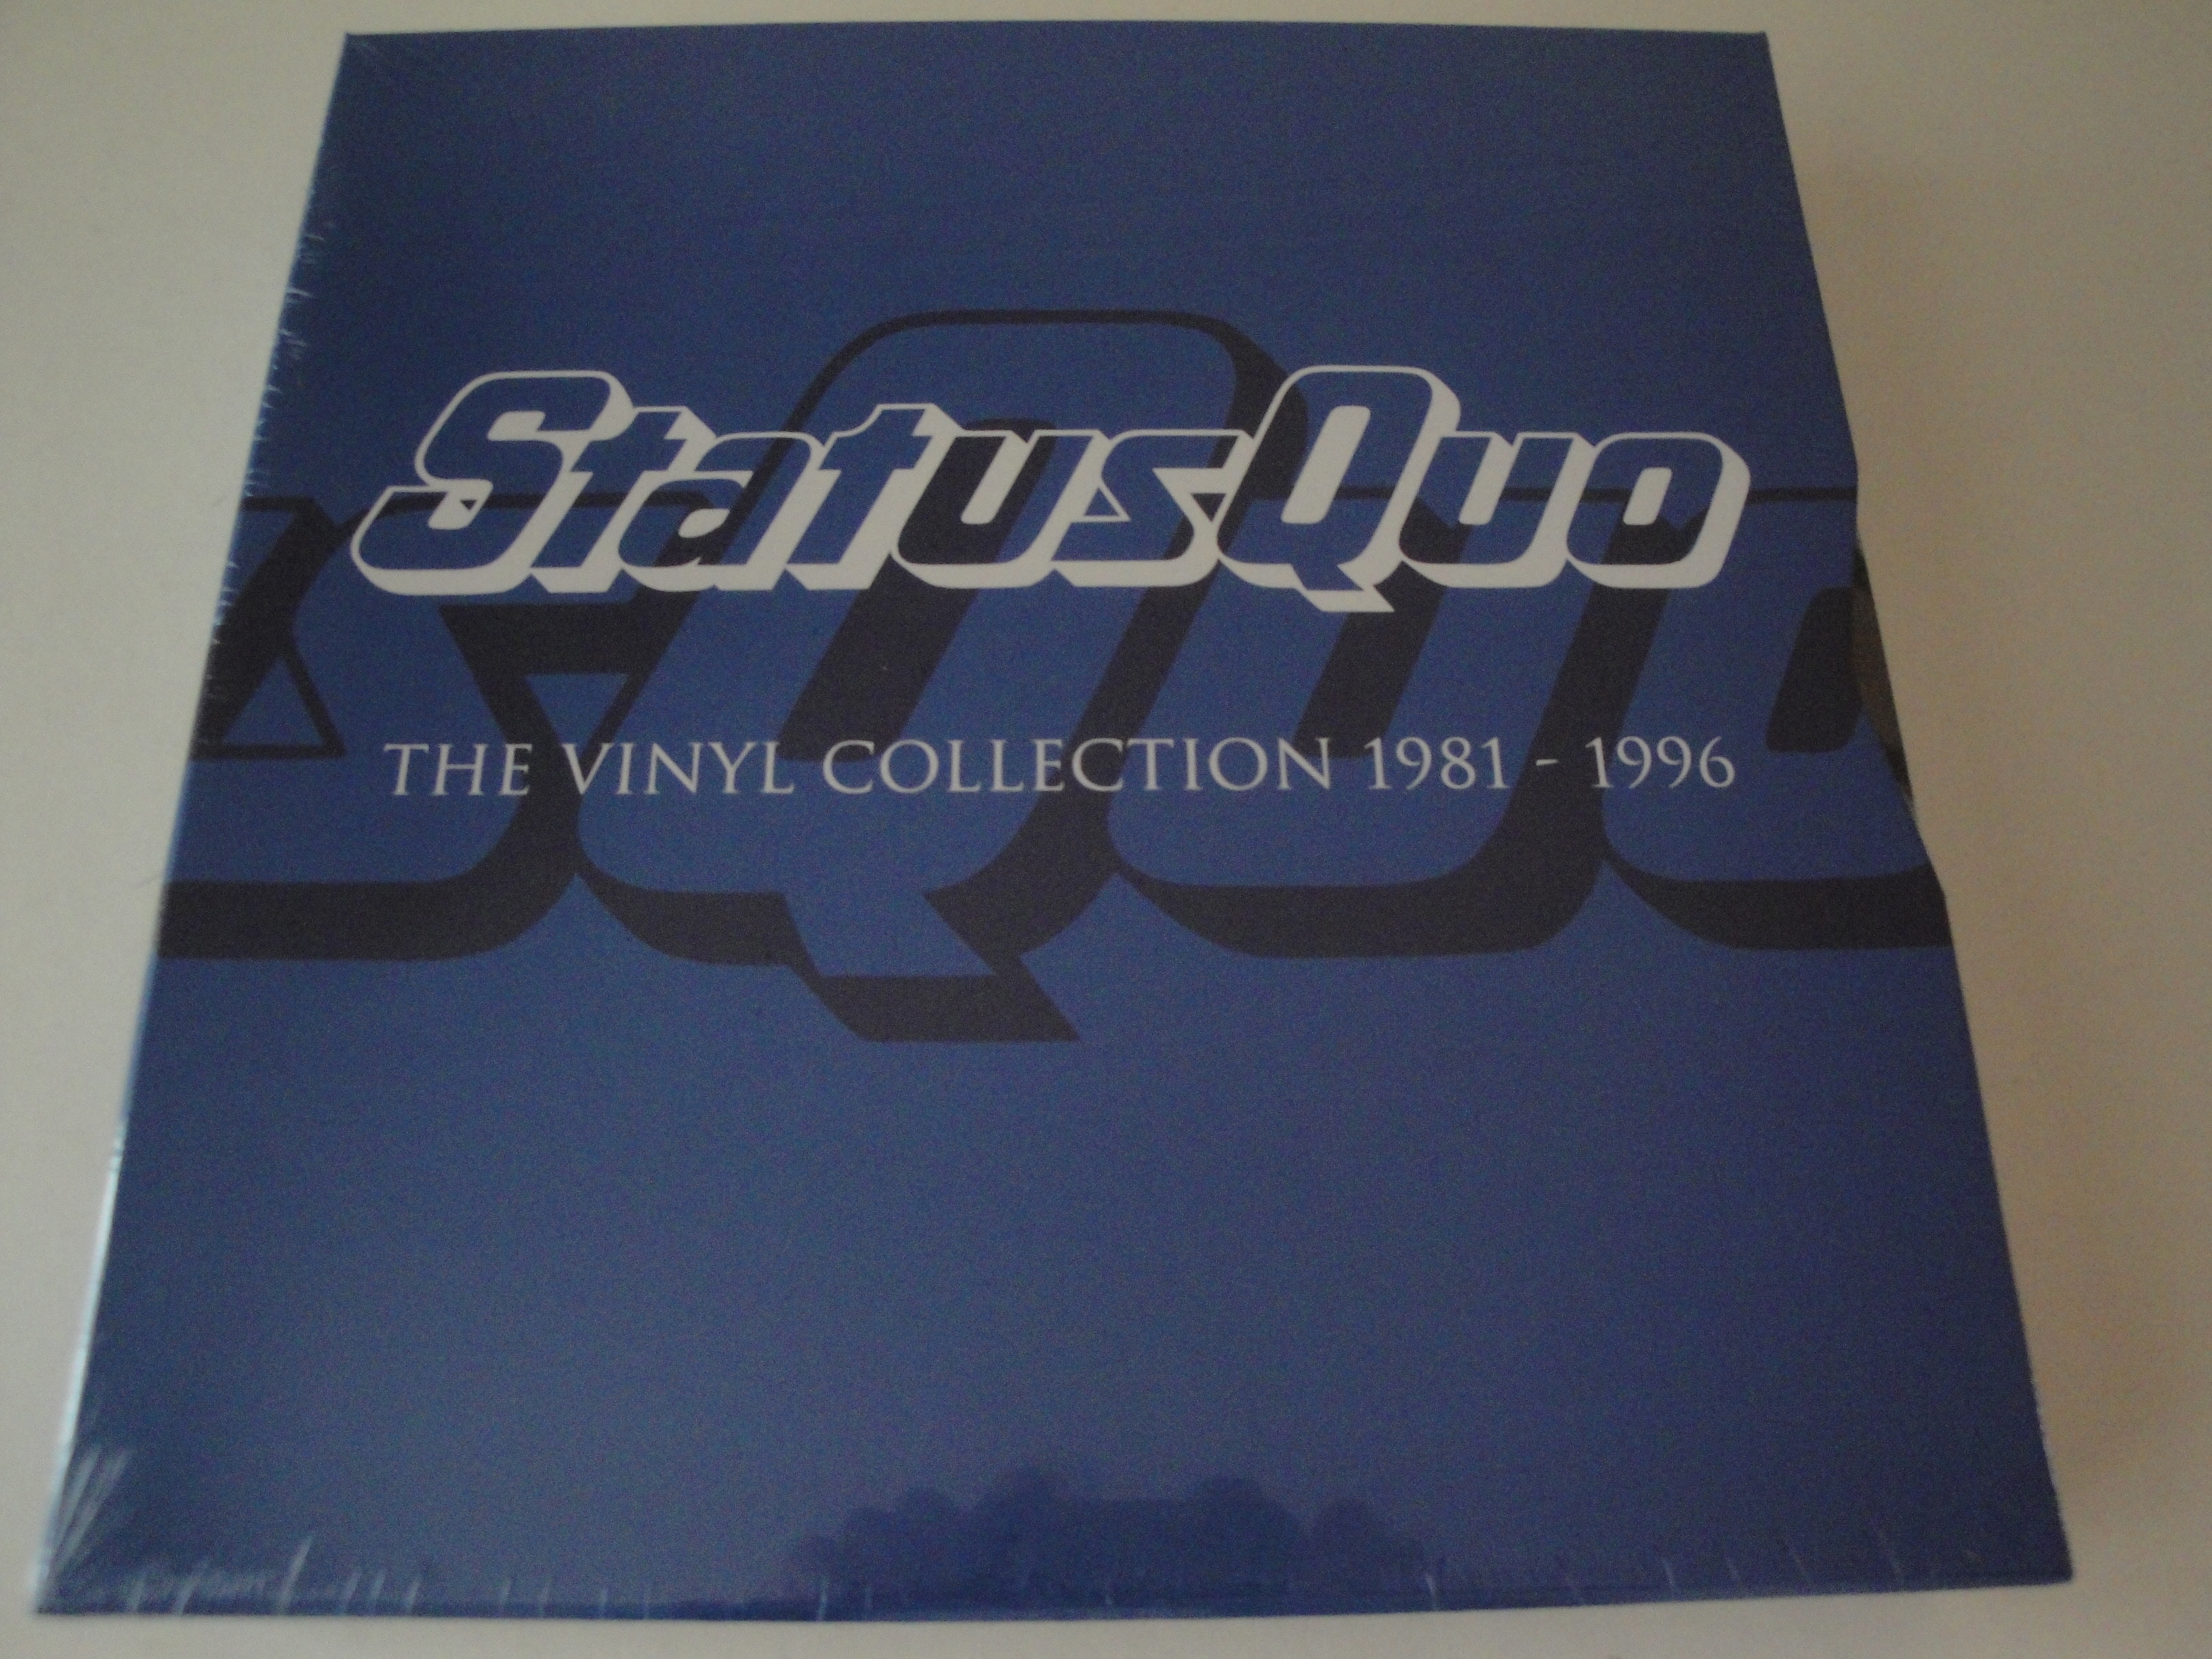 The Vinyl Collection 1981- 1996